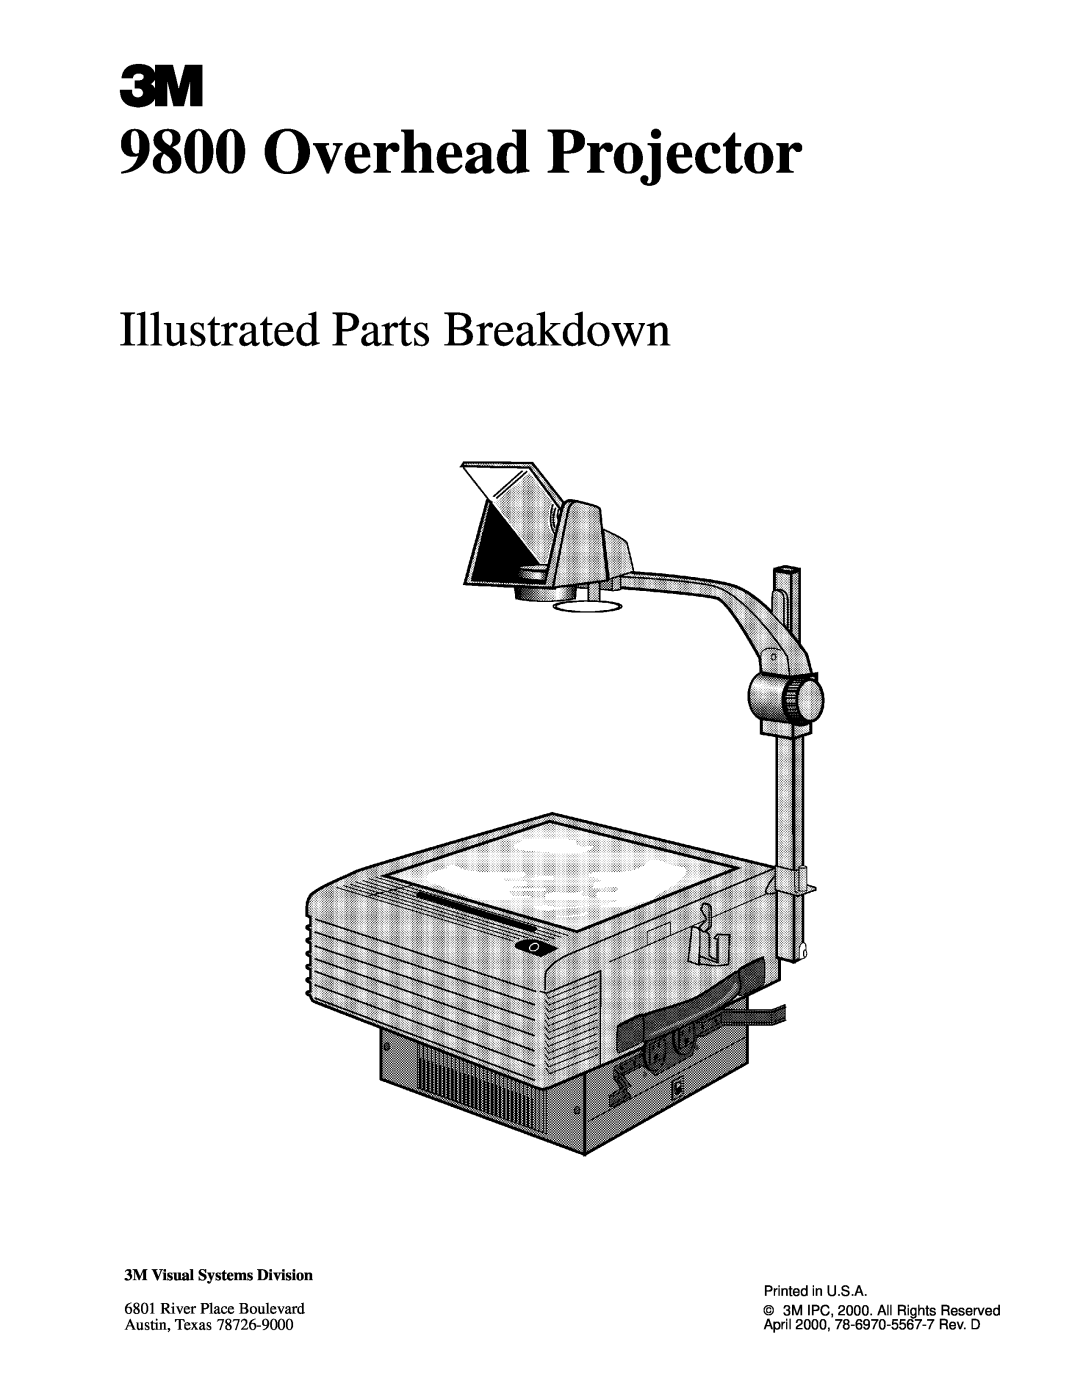 3M 9800 manual Overhead Projector, Illustrated Parts Breakdown, 3M Visual Systems Division, River Place Boulevard 